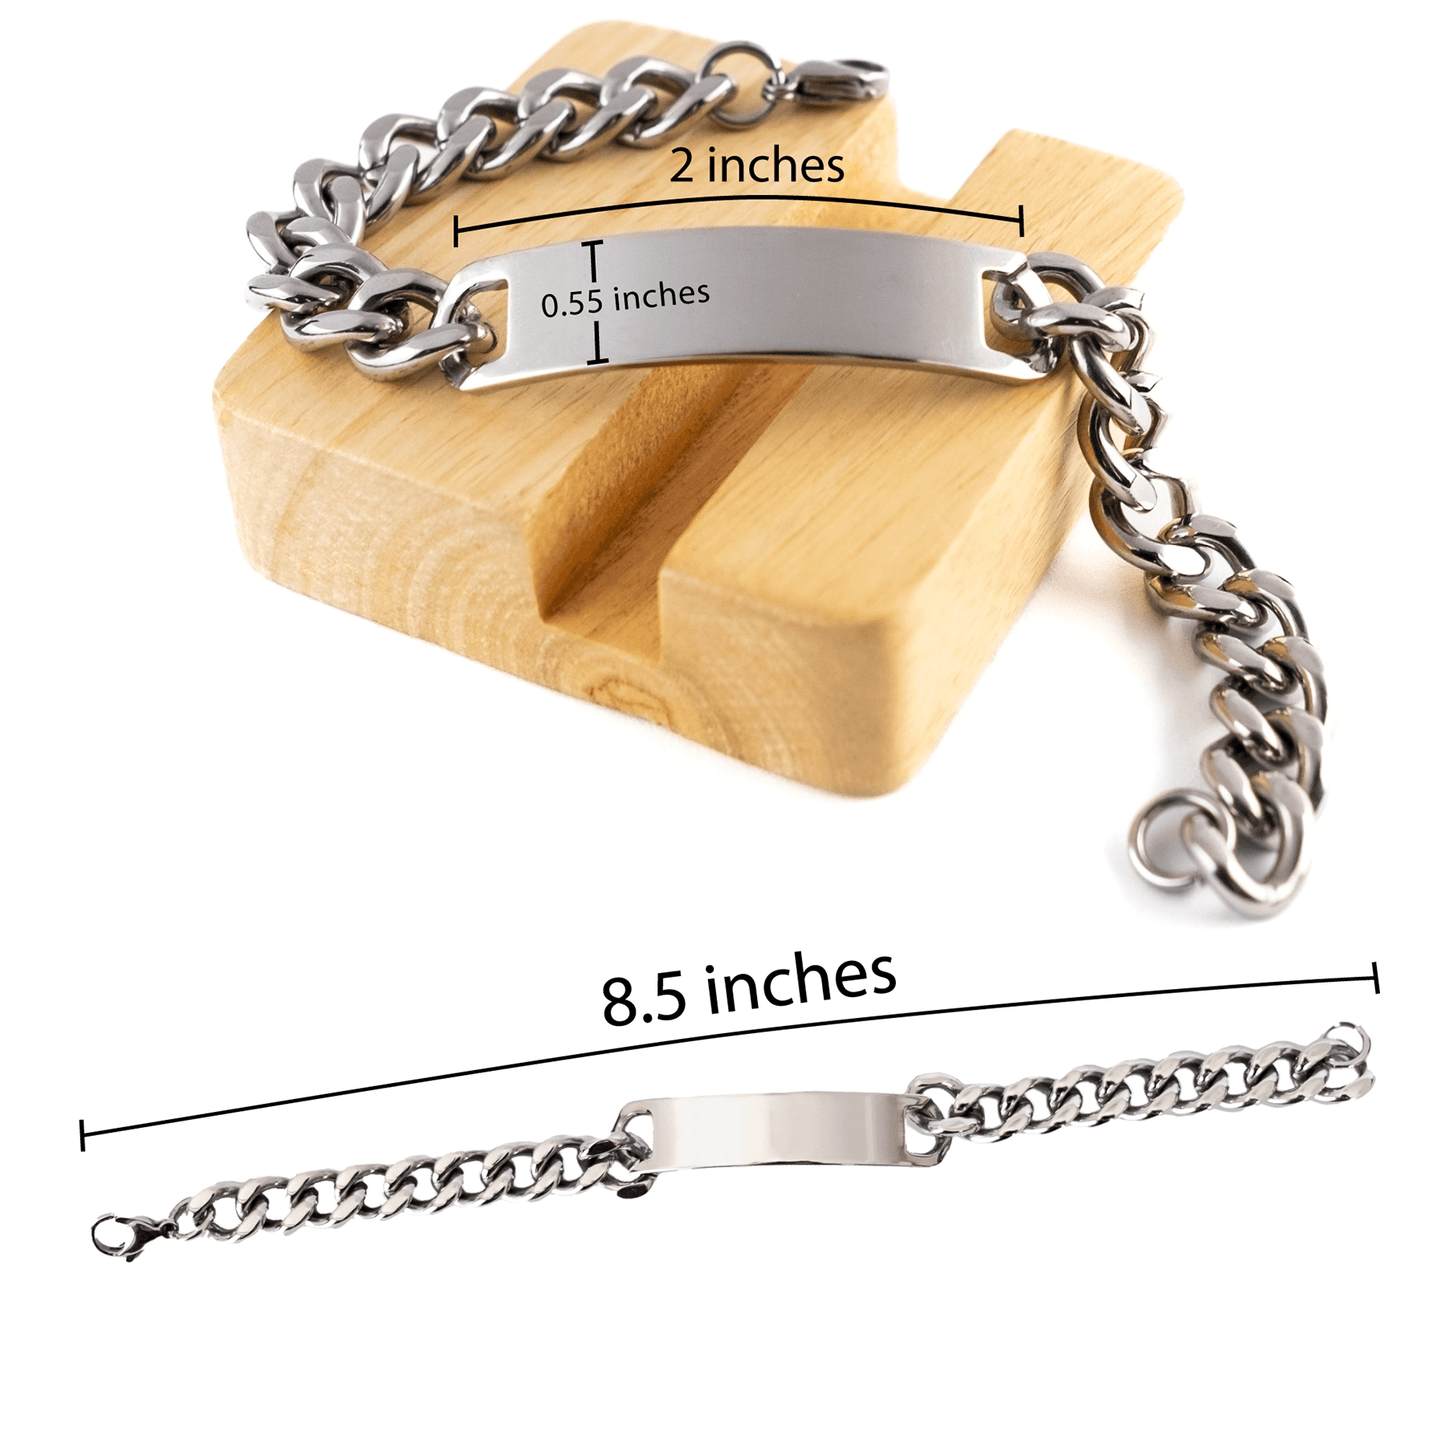 Husband Cuban Chain Stainless Steel Engraved Bracelet, Motivational Birthday Valentine Gifts Life is learning to dance in the rain, finding good in each day. I'm always with you - Mallard Moon Gift Shop